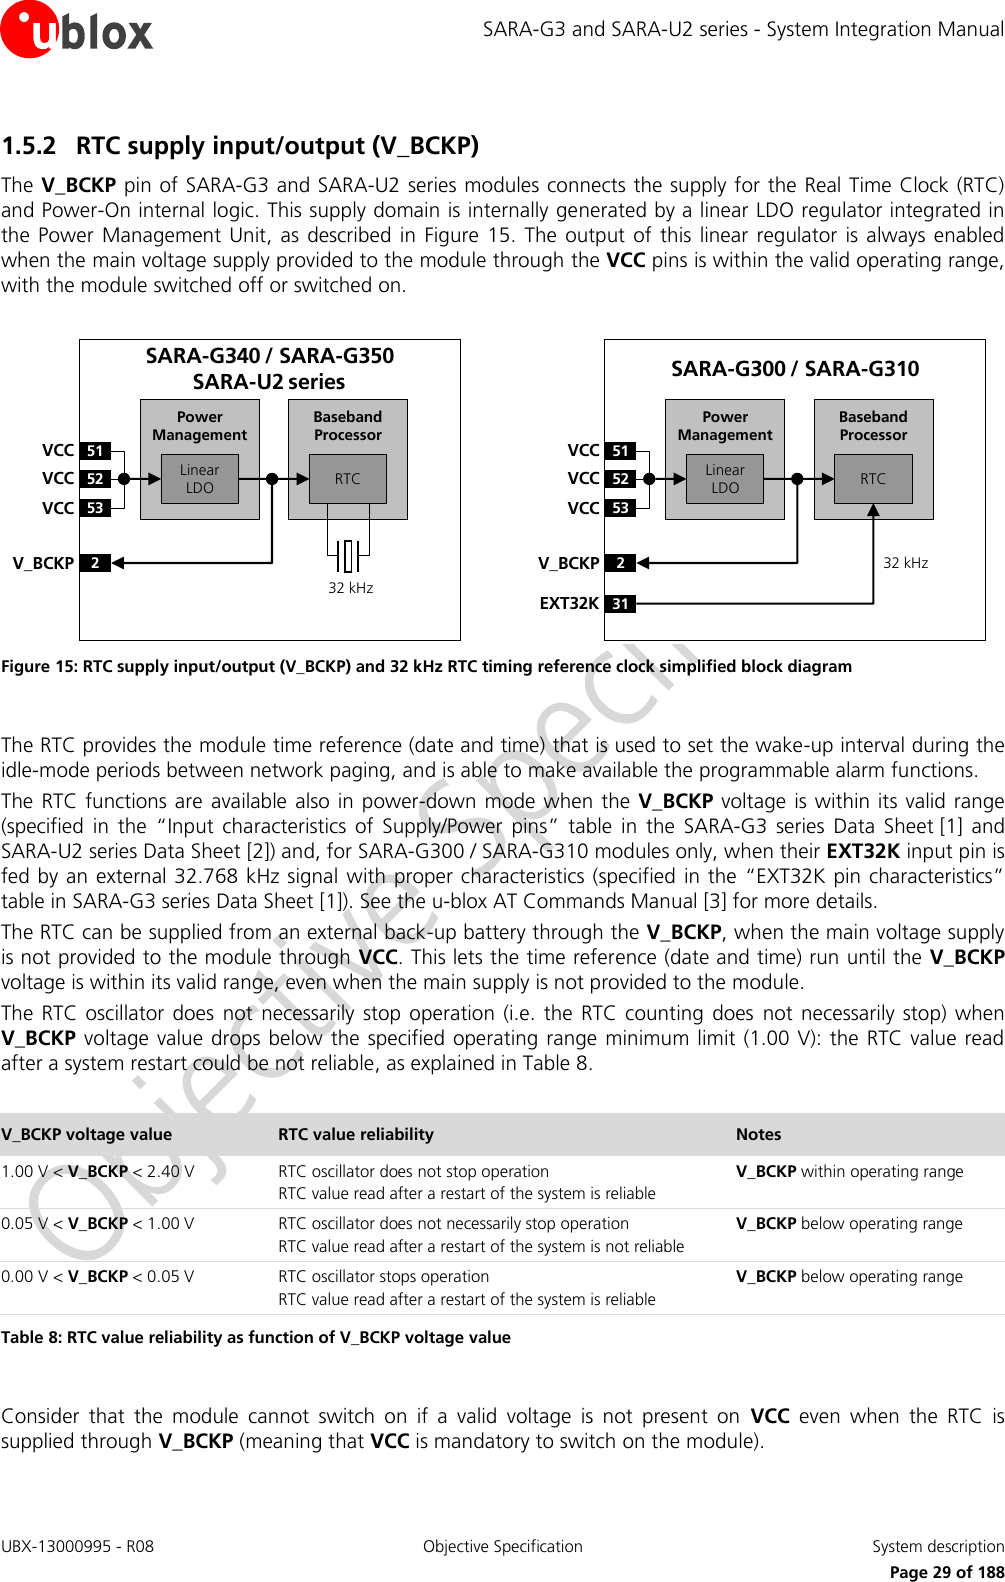 SARA-G3 and SARA-U2 series - System Integration Manual UBX-13000995 - R08  Objective Specification  System description     Page 29 of 188 1.5.2 RTC supply input/output (V_BCKP) The V_BCKP pin of SARA-G3 and SARA-U2 series modules connects the supply for the Real Time Clock (RTC) and Power-On internal logic. This supply domain is internally generated by a linear LDO regulator integrated in the  Power Management  Unit,  as described in  Figure  15. The output  of this  linear regulator  is always  enabled when the main voltage supply provided to the module through the VCC pins is within the valid operating range, with the module switched off or switched on.  Baseband Processor51VCC52VCC53VCC2V_BCKPLinear LDO RTCPower ManagementSARA-G340 / SARA-G350SARA-U2 series32 kHzBaseband Processor51VCC52VCC53VCC2V_BCKPLinear LDO RTCPower ManagementSARA-G300 / SARA-G31032 kHz31EXT32K Figure 15: RTC supply input/output (V_BCKP) and 32 kHz RTC timing reference clock simplified block diagram  The RTC provides the module time reference (date and time) that is used to set the wake-up interval during the idle-mode periods between network paging, and is able to make available the programmable alarm functions. The RTC  functions are available also in power-down  mode when  the V_BCKP voltage is within its valid range (specified  in  the  “Input  characteristics  of  Supply/Power  pins”  table  in  the  SARA-G3  series  Data  Sheet [1]  and SARA-U2 series Data Sheet [2]) and, for SARA-G300 / SARA-G310 modules only, when their EXT32K input pin is fed by an external 32.768 kHz signal with proper characteristics (specified in the “EXT32K pin characteristics” table in SARA-G3 series Data Sheet [1]). See the u-blox AT Commands Manual [3] for more details. The RTC can be supplied from an external back-up battery through the V_BCKP, when the main voltage supply is not provided to the module through VCC. This lets the time reference (date and time) run until the V_BCKP voltage is within its valid range, even when the main supply is not provided to the module. The  RTC oscillator  does  not  necessarily  stop operation  (i.e. the  RTC counting  does  not necessarily stop) when V_BCKP voltage value  drops below the specified  operating range minimum  limit (1.00 V): the  RTC value read after a system restart could be not reliable, as explained in Table 8.  V_BCKP voltage value RTC value reliability Notes 1.00 V &lt; V_BCKP &lt; 2.40 V RTC oscillator does not stop operation RTC value read after a restart of the system is reliable V_BCKP within operating range 0.05 V &lt; V_BCKP &lt; 1.00 V RTC oscillator does not necessarily stop operation RTC value read after a restart of the system is not reliable V_BCKP below operating range 0.00 V &lt; V_BCKP &lt; 0.05 V RTC oscillator stops operation RTC value read after a restart of the system is reliable V_BCKP below operating range Table 8: RTC value reliability as function of V_BCKP voltage value   Consider  that  the  module  cannot  switch  on  if  a  valid  voltage  is  not  present  on  VCC  even  when  the  RTC  is supplied through V_BCKP (meaning that VCC is mandatory to switch on the module). 